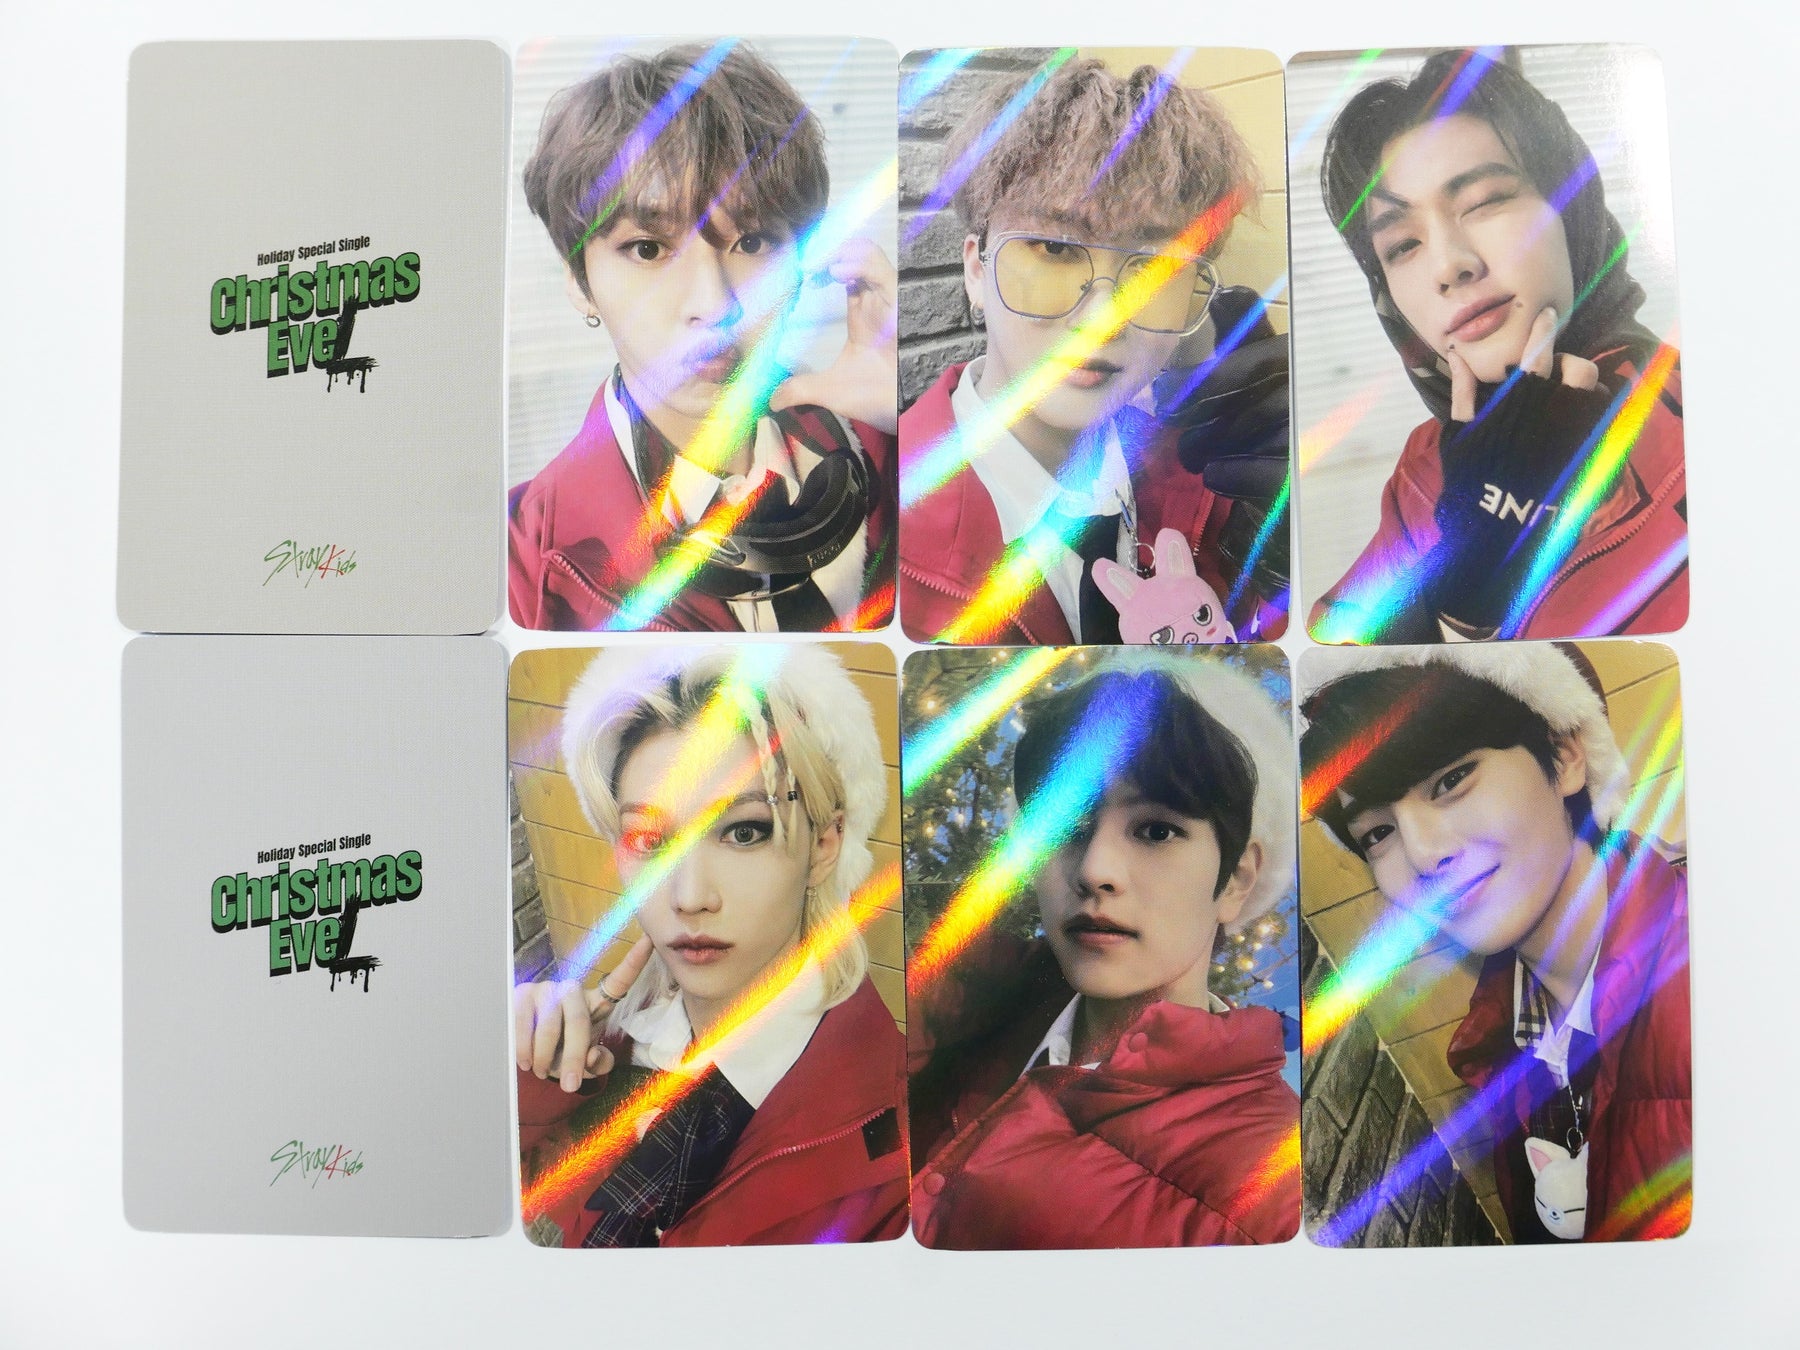 Stray Kids 'Christmas EveL' Holiday Special Single - Music Plant Pre-Order  Benefit Hologram Photocard